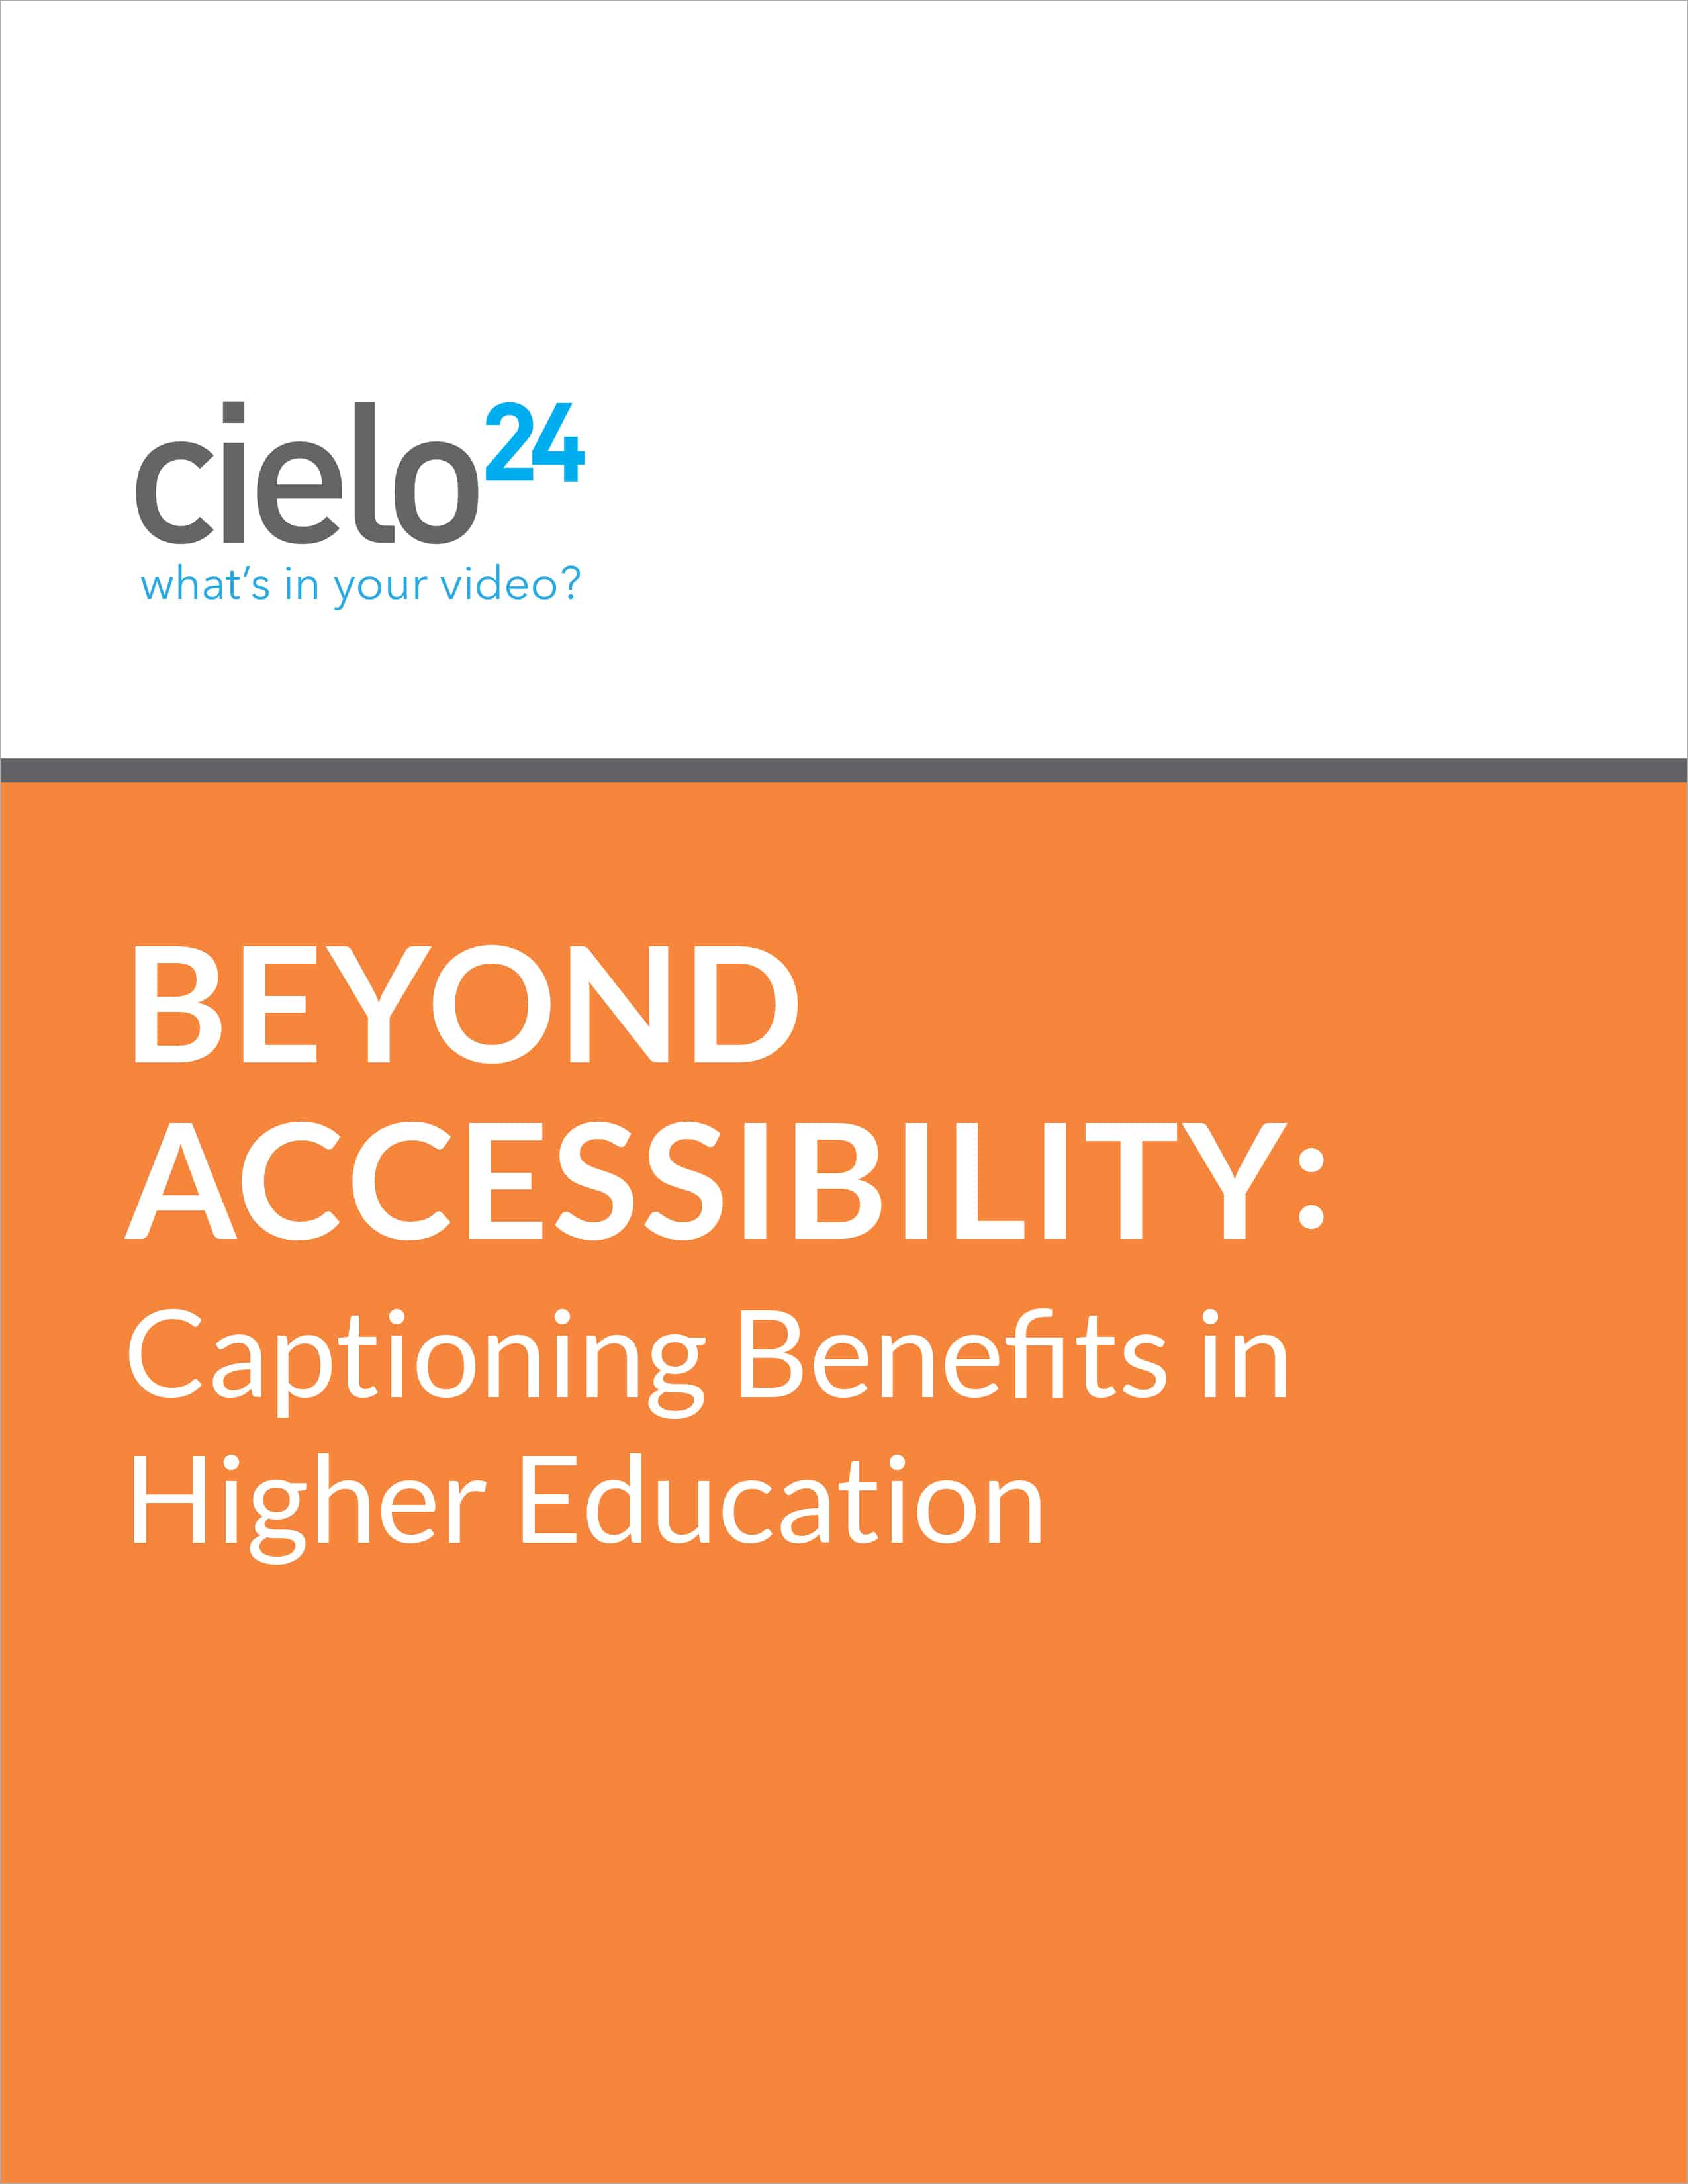 Beyond Accessibility: Captioning Benefits in Higher Education eBook